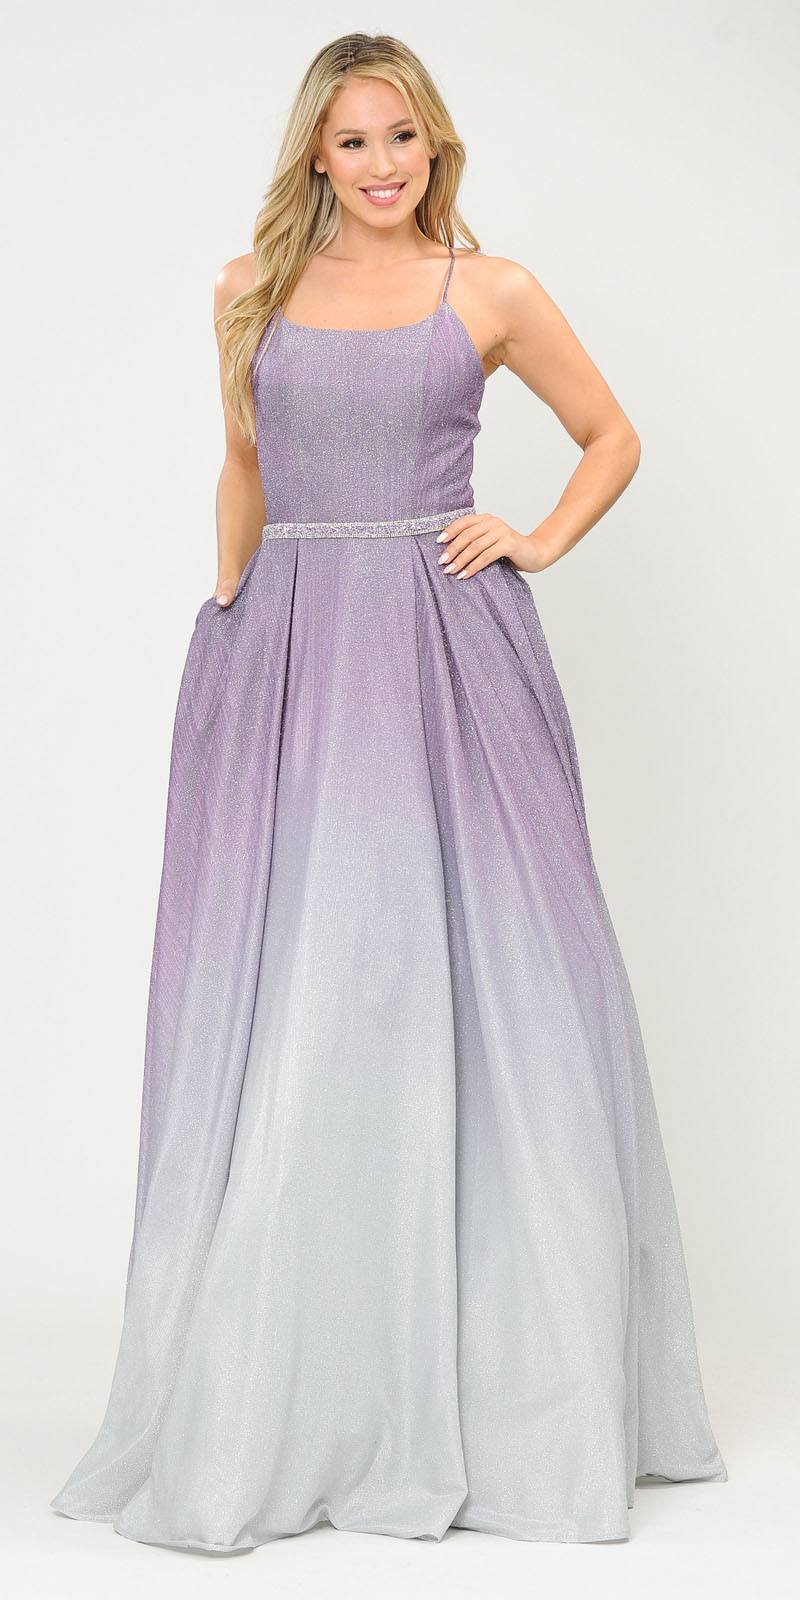 Poly USA 8708 Prom Ball Gown Criss-Cross Back with Pockets Lavender